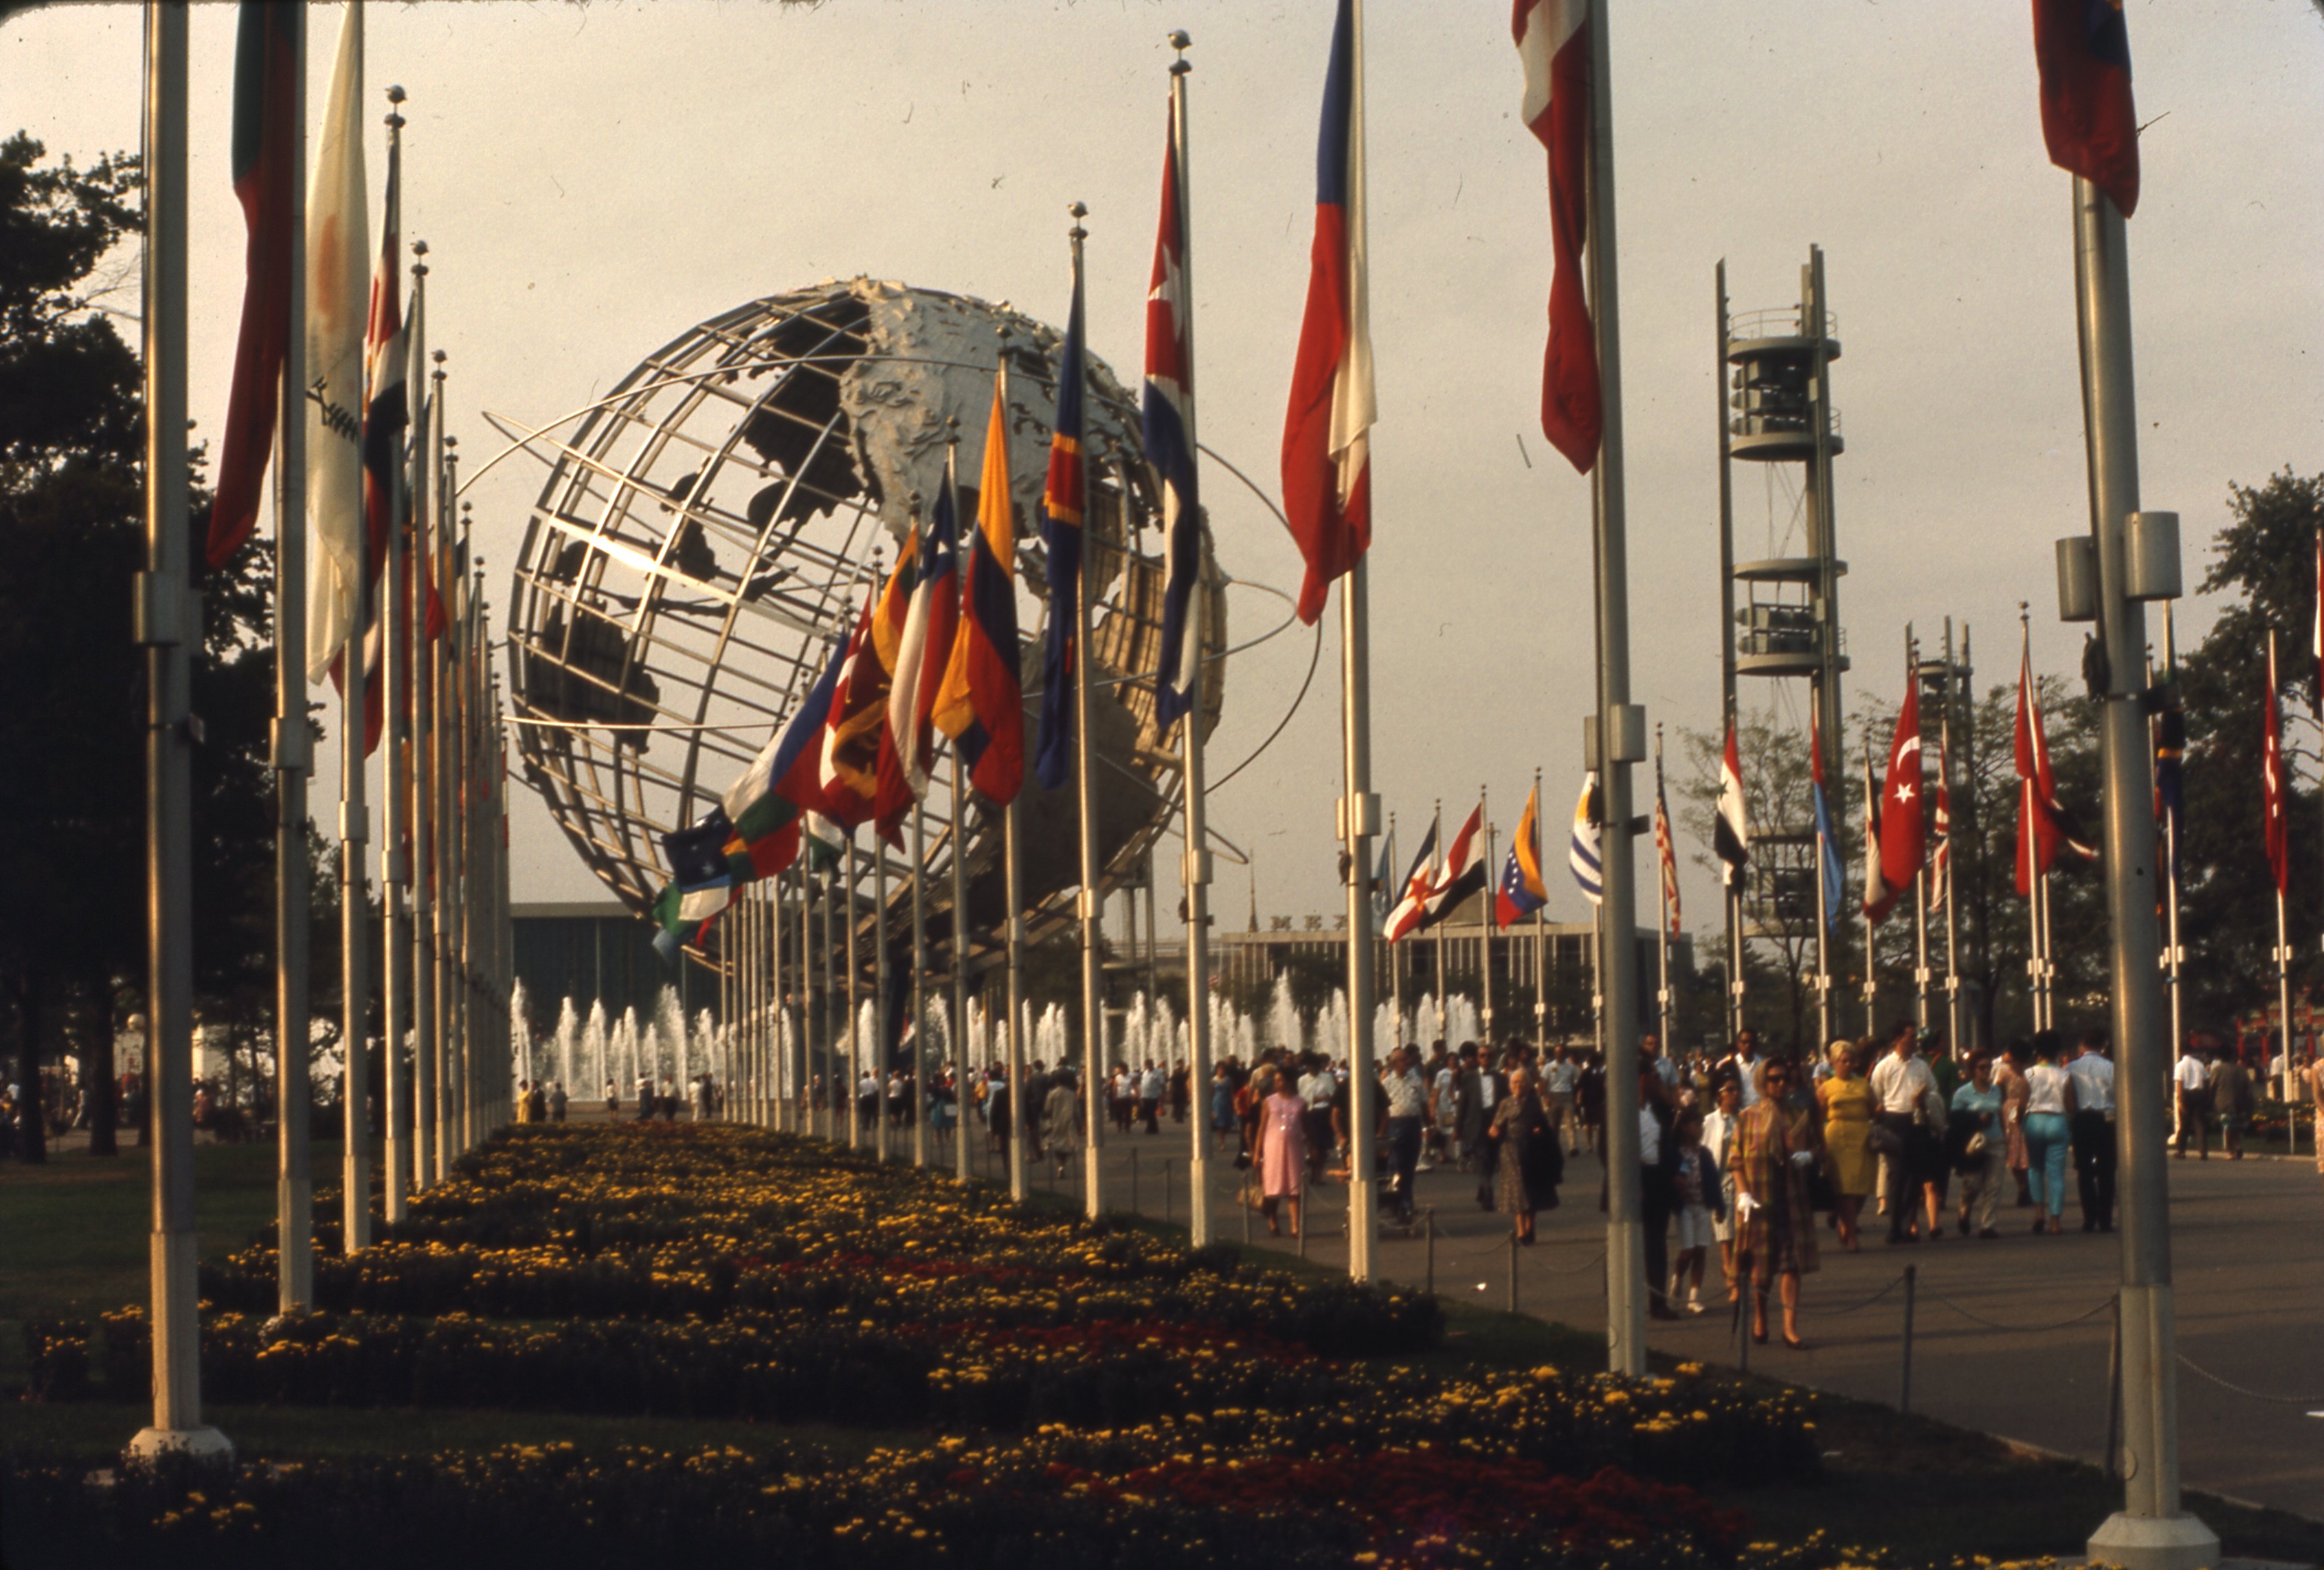 View of the Unisphere in 1965 with world flags in the foreground.